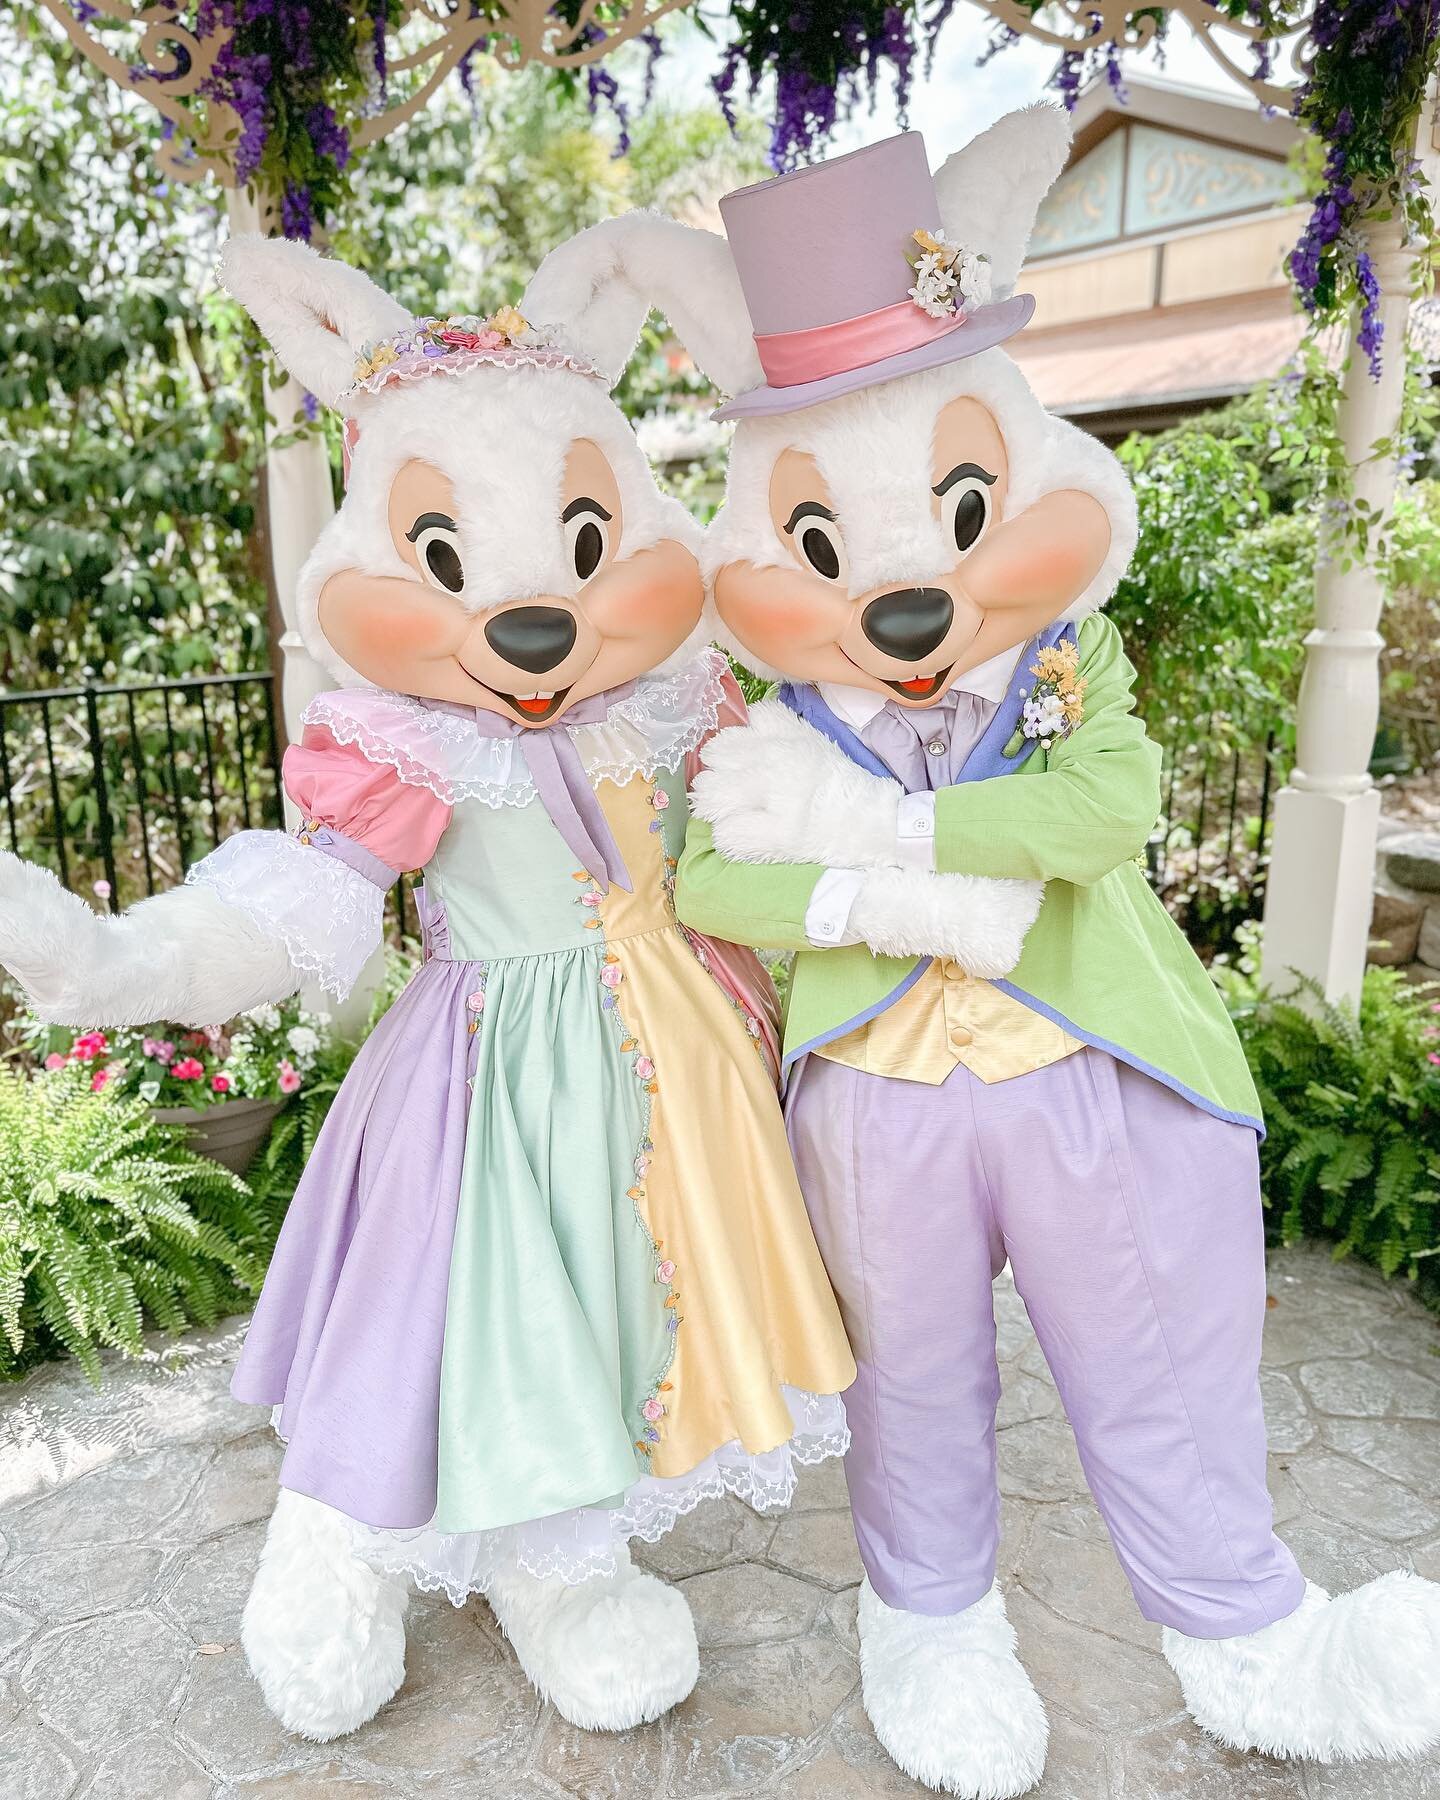 Happy Easter! 🐣 The Mini Mouse Counselors send love to all of our clients, family and friends! Did you know about this adorable meet and greet with Mr. &amp; Mrs. Easter Bunny at Magic Kingdom?! 
&bull;
&bull;
&bull;
&bull;
#magickingdom #easterbunn